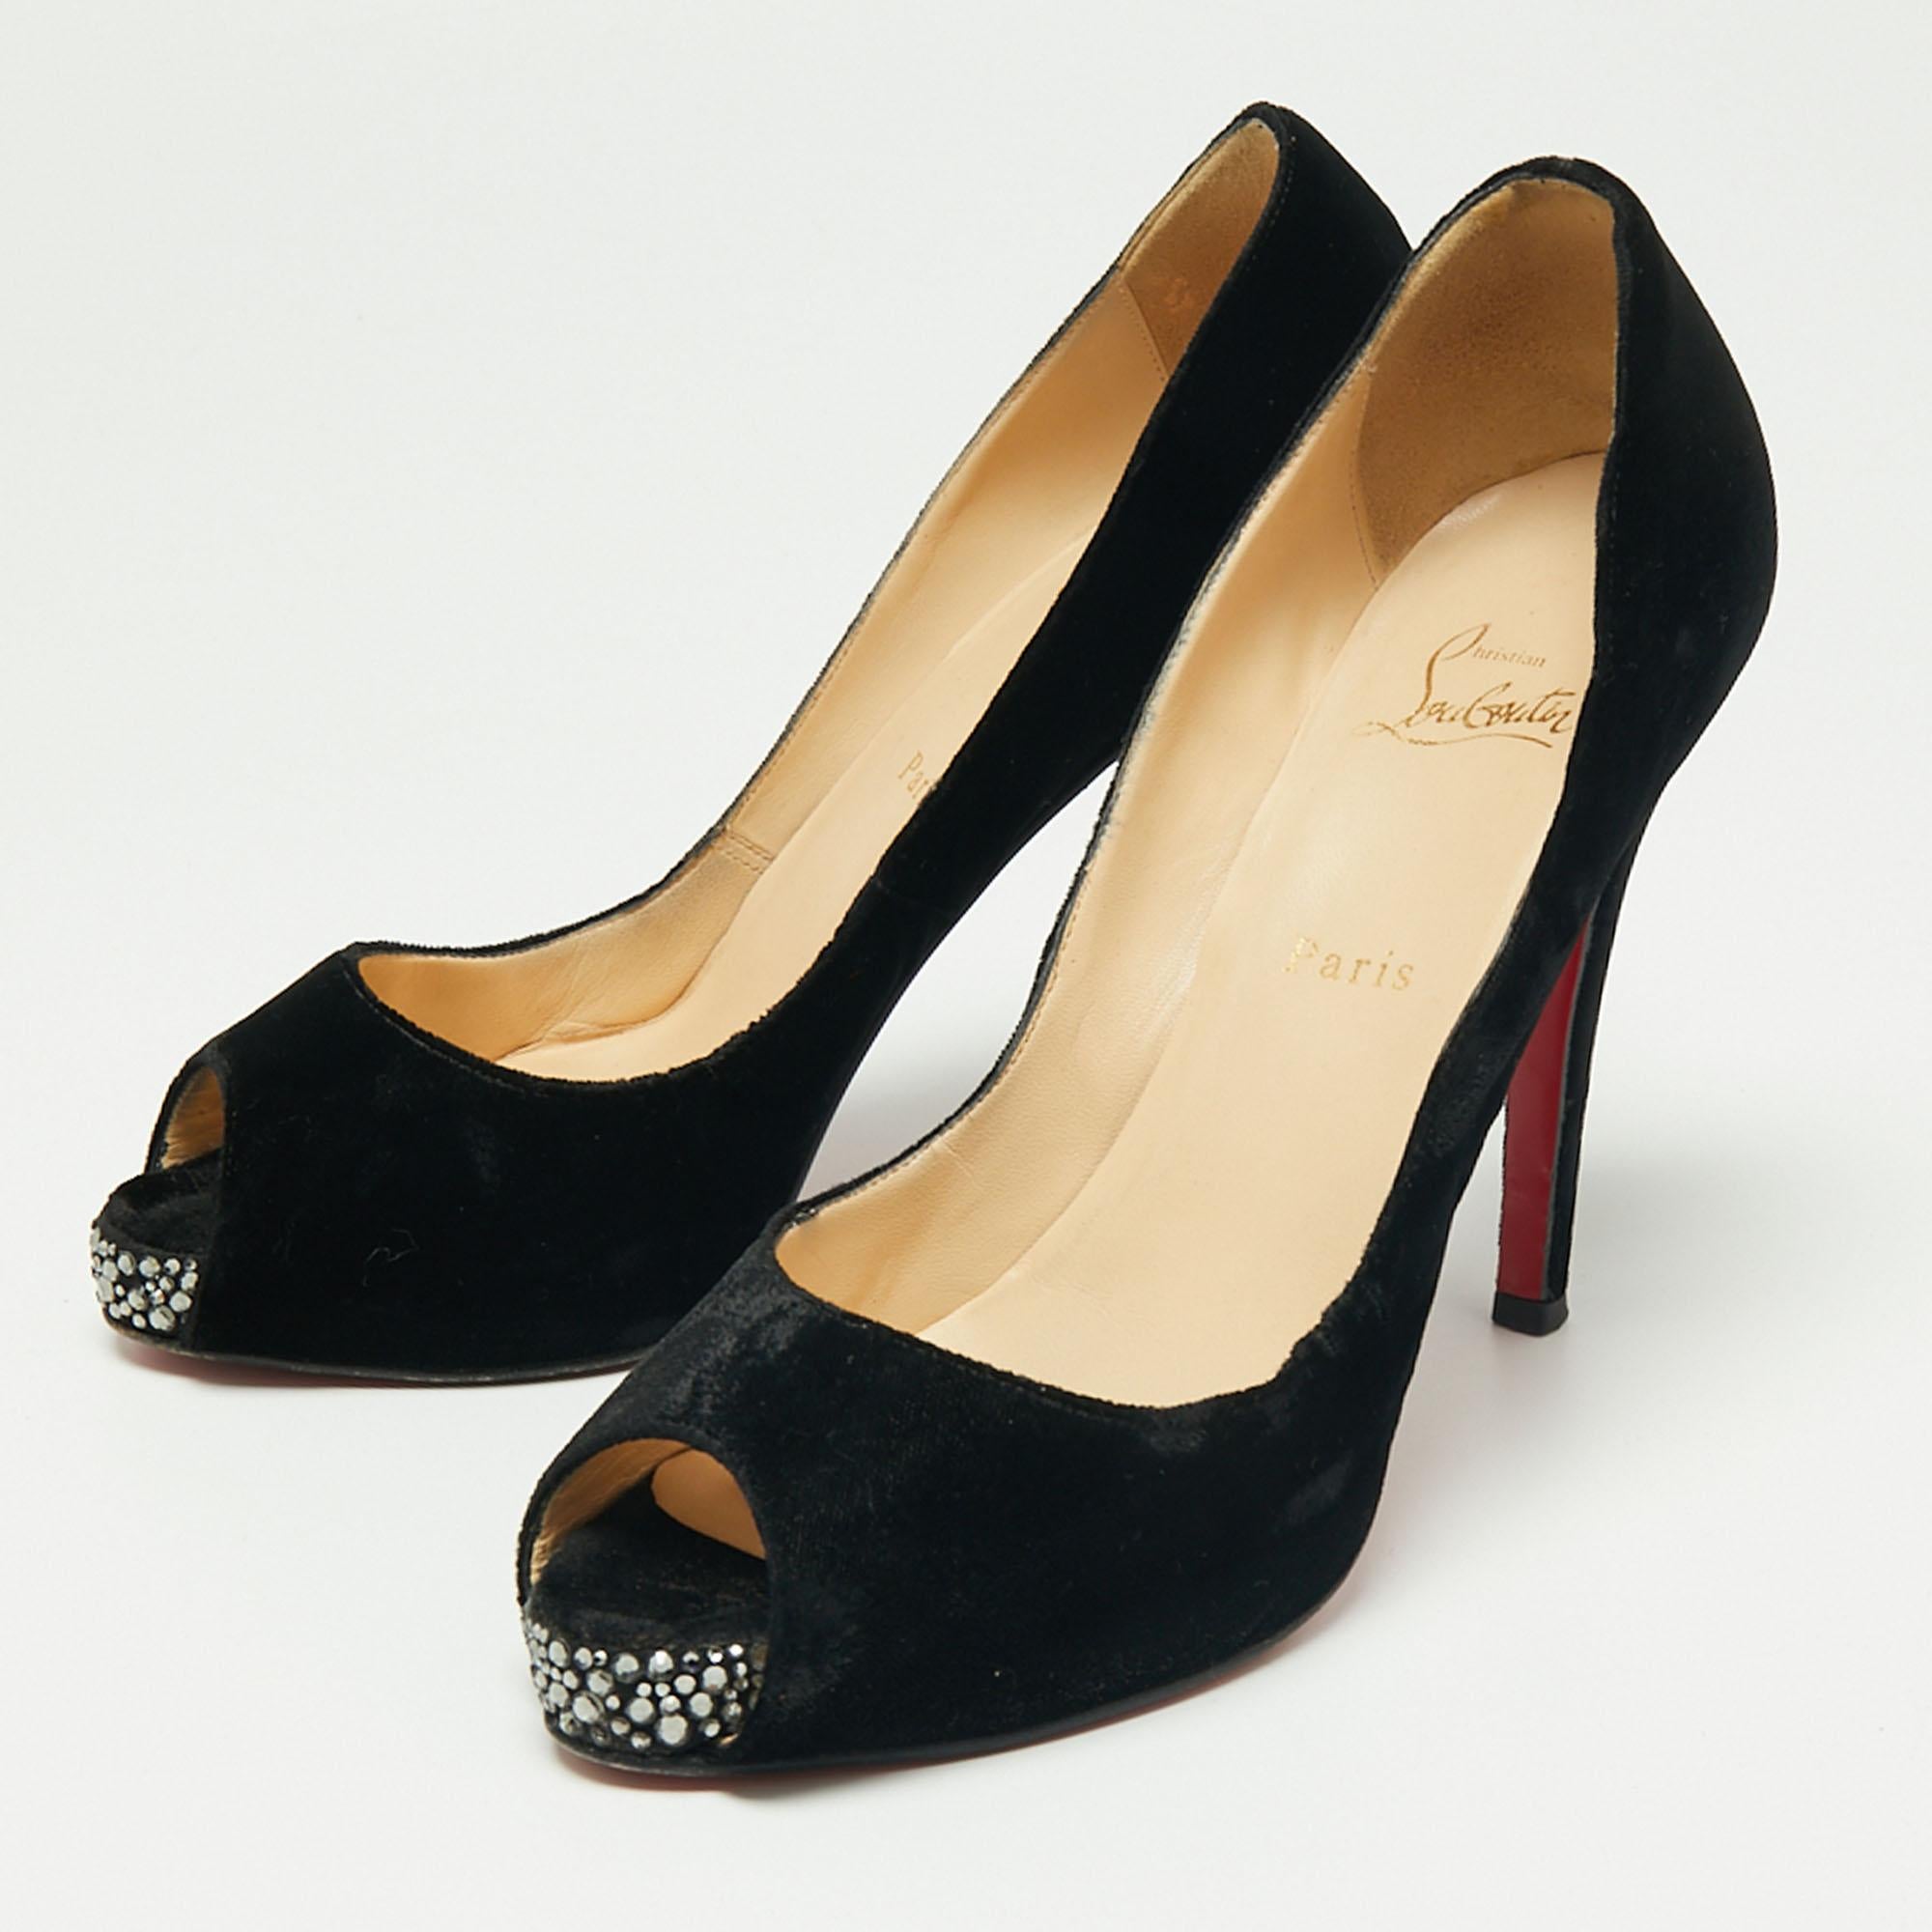 These Christian Louboutin pumps exude a refined style and sophisticated vibe with their minimal design. Crafted from black velvet, they are highlighted by crystals on the toes. These beauties are finished off with stiletto heels and low platforms.